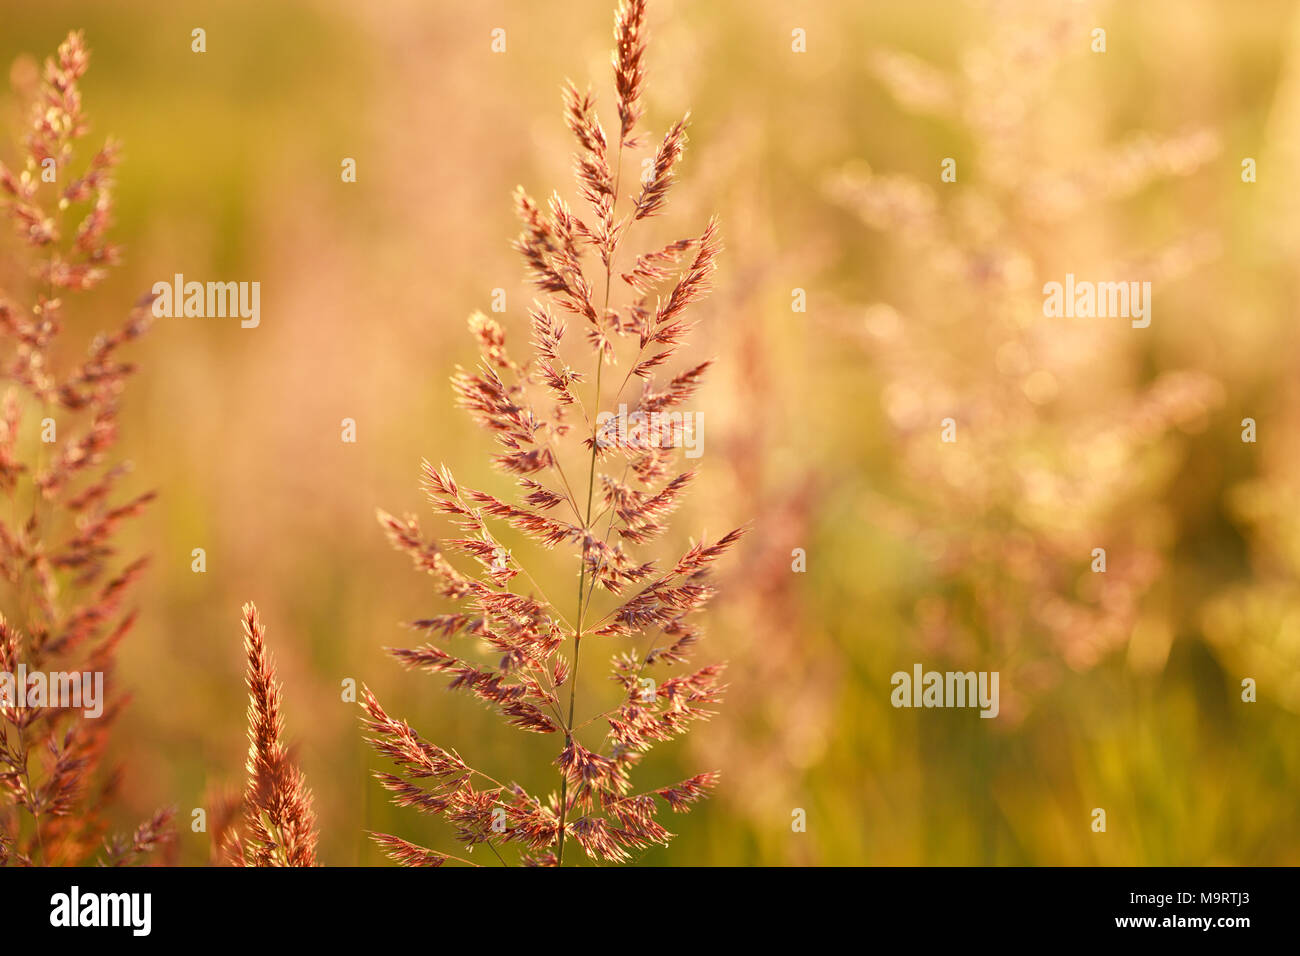 Calamagrostis lapponica or reed grass at sunset, selective focus on some branches Stock Photo